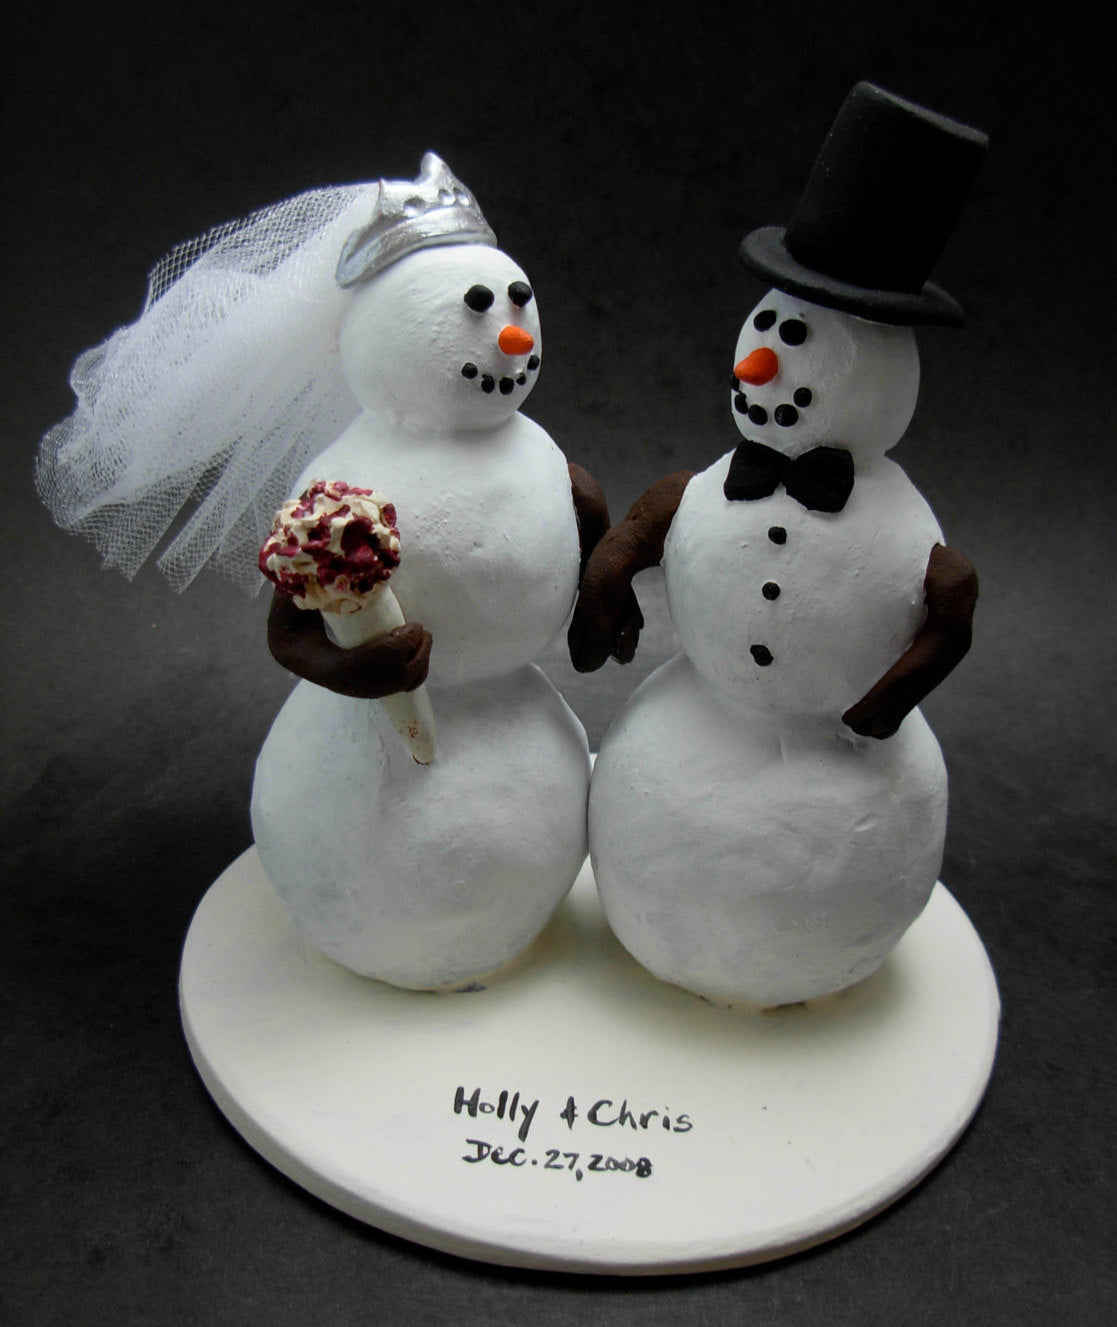 Snowman Bride and Groom Wedding Cake Topper, custom made Snowman Wedding Cake Topper,  Wedding Cake Topper for Snowmen - iWeddingCakeToppers